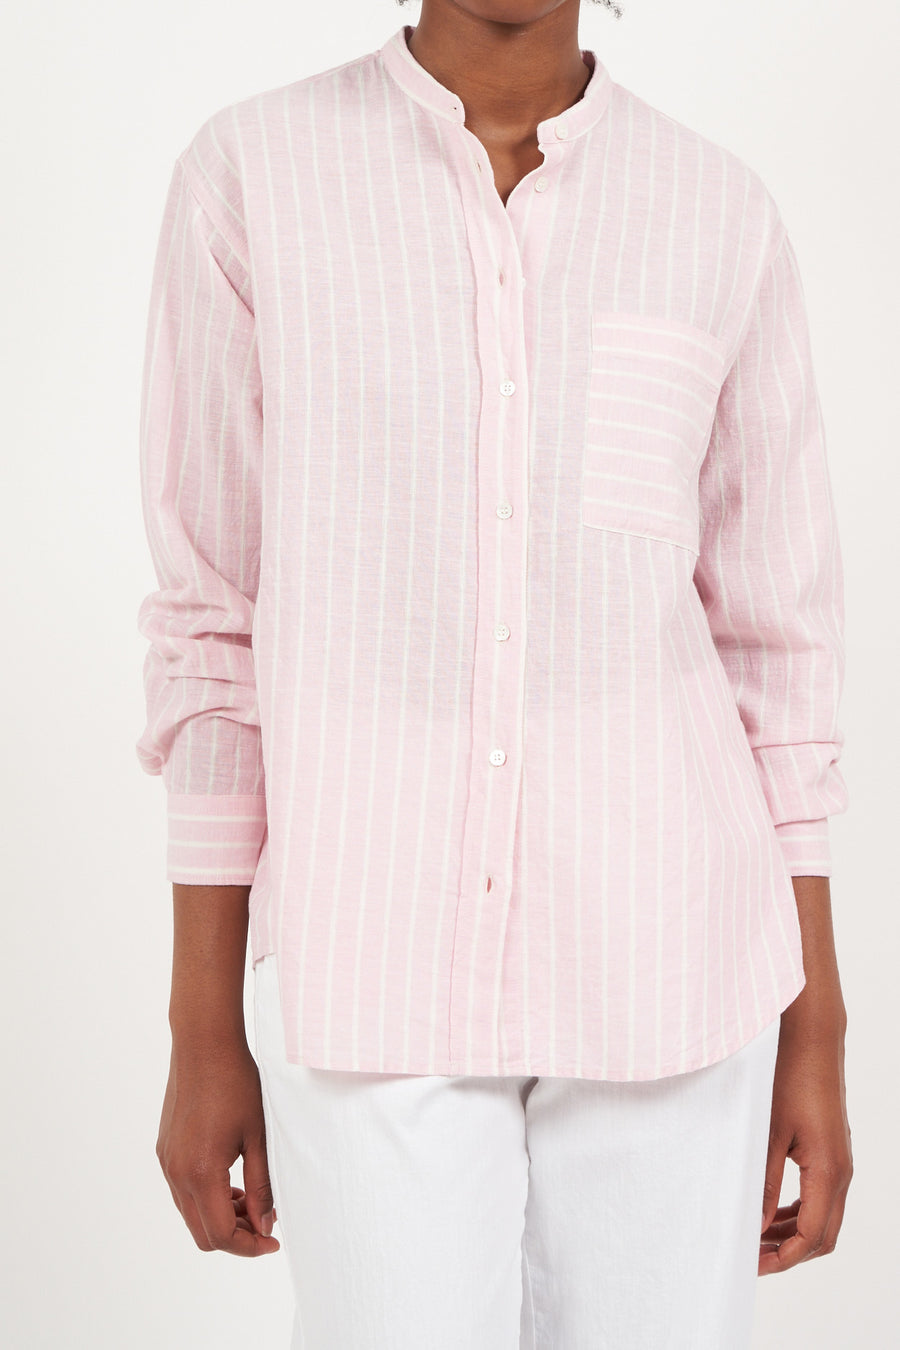 HARTFORD CONNOR SHIRT IN LIGHT PINK WITH NARROW WHITE STRIPES